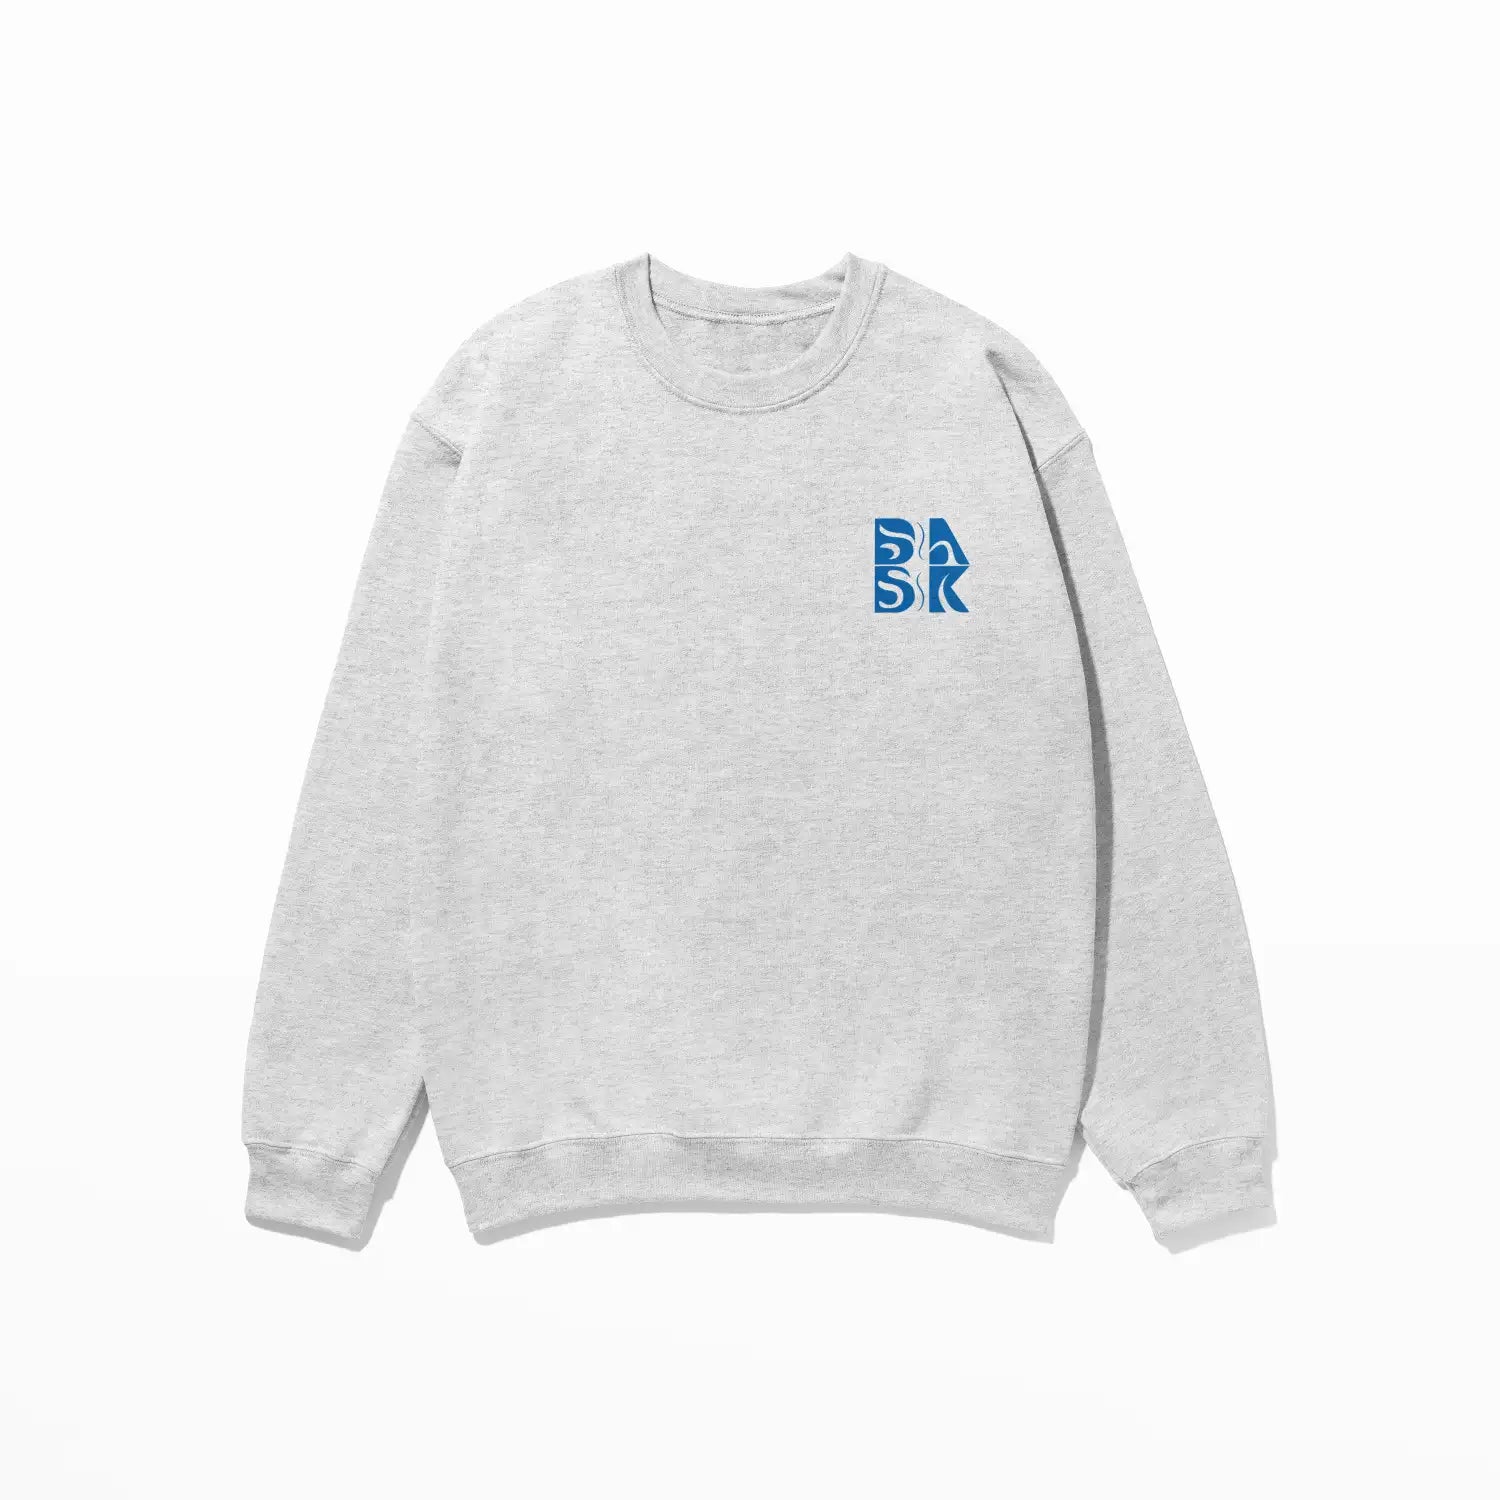 A grey Kupa'a Tide Sweatshirt with a blue Be Still and Know logo on it.